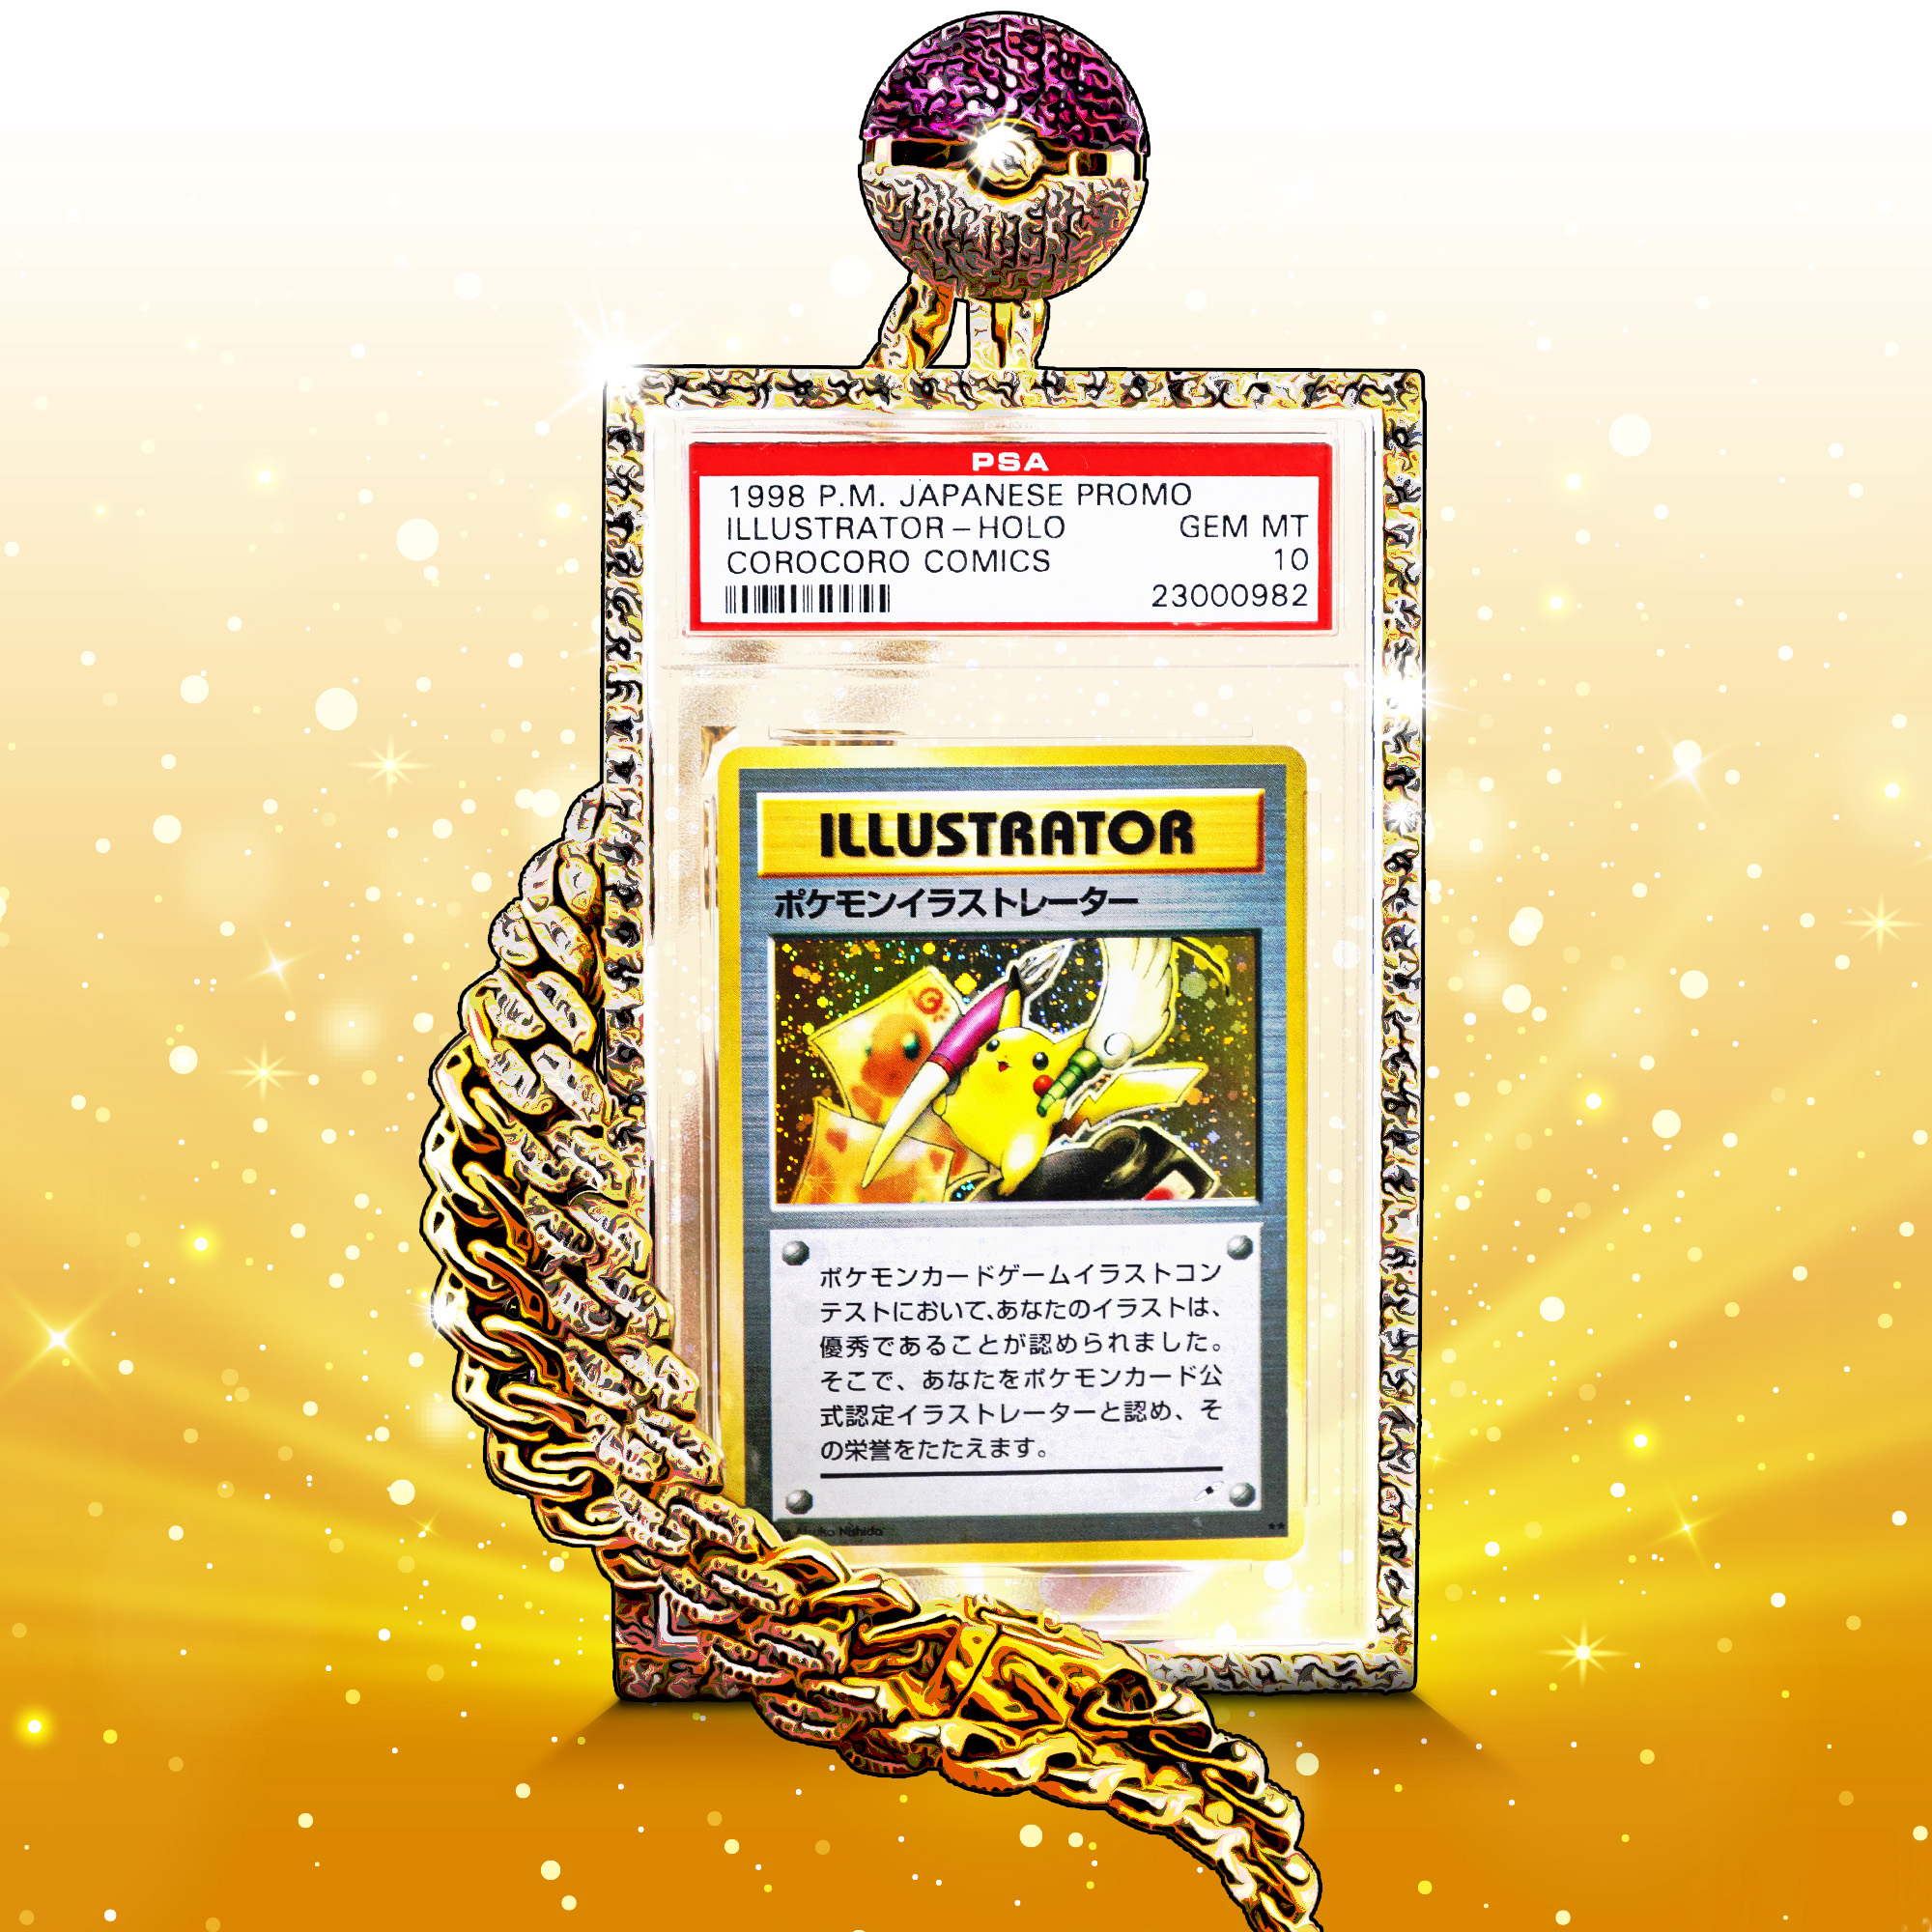 PSAcard on X: ⚡️The PSA 10 Pikachu Illustrator has arrived on  @LiquidMarketpl! Take the opportunity to co-own Pokémon's holy grail, the  card that received a Guinness World Record for the 'Most expensive